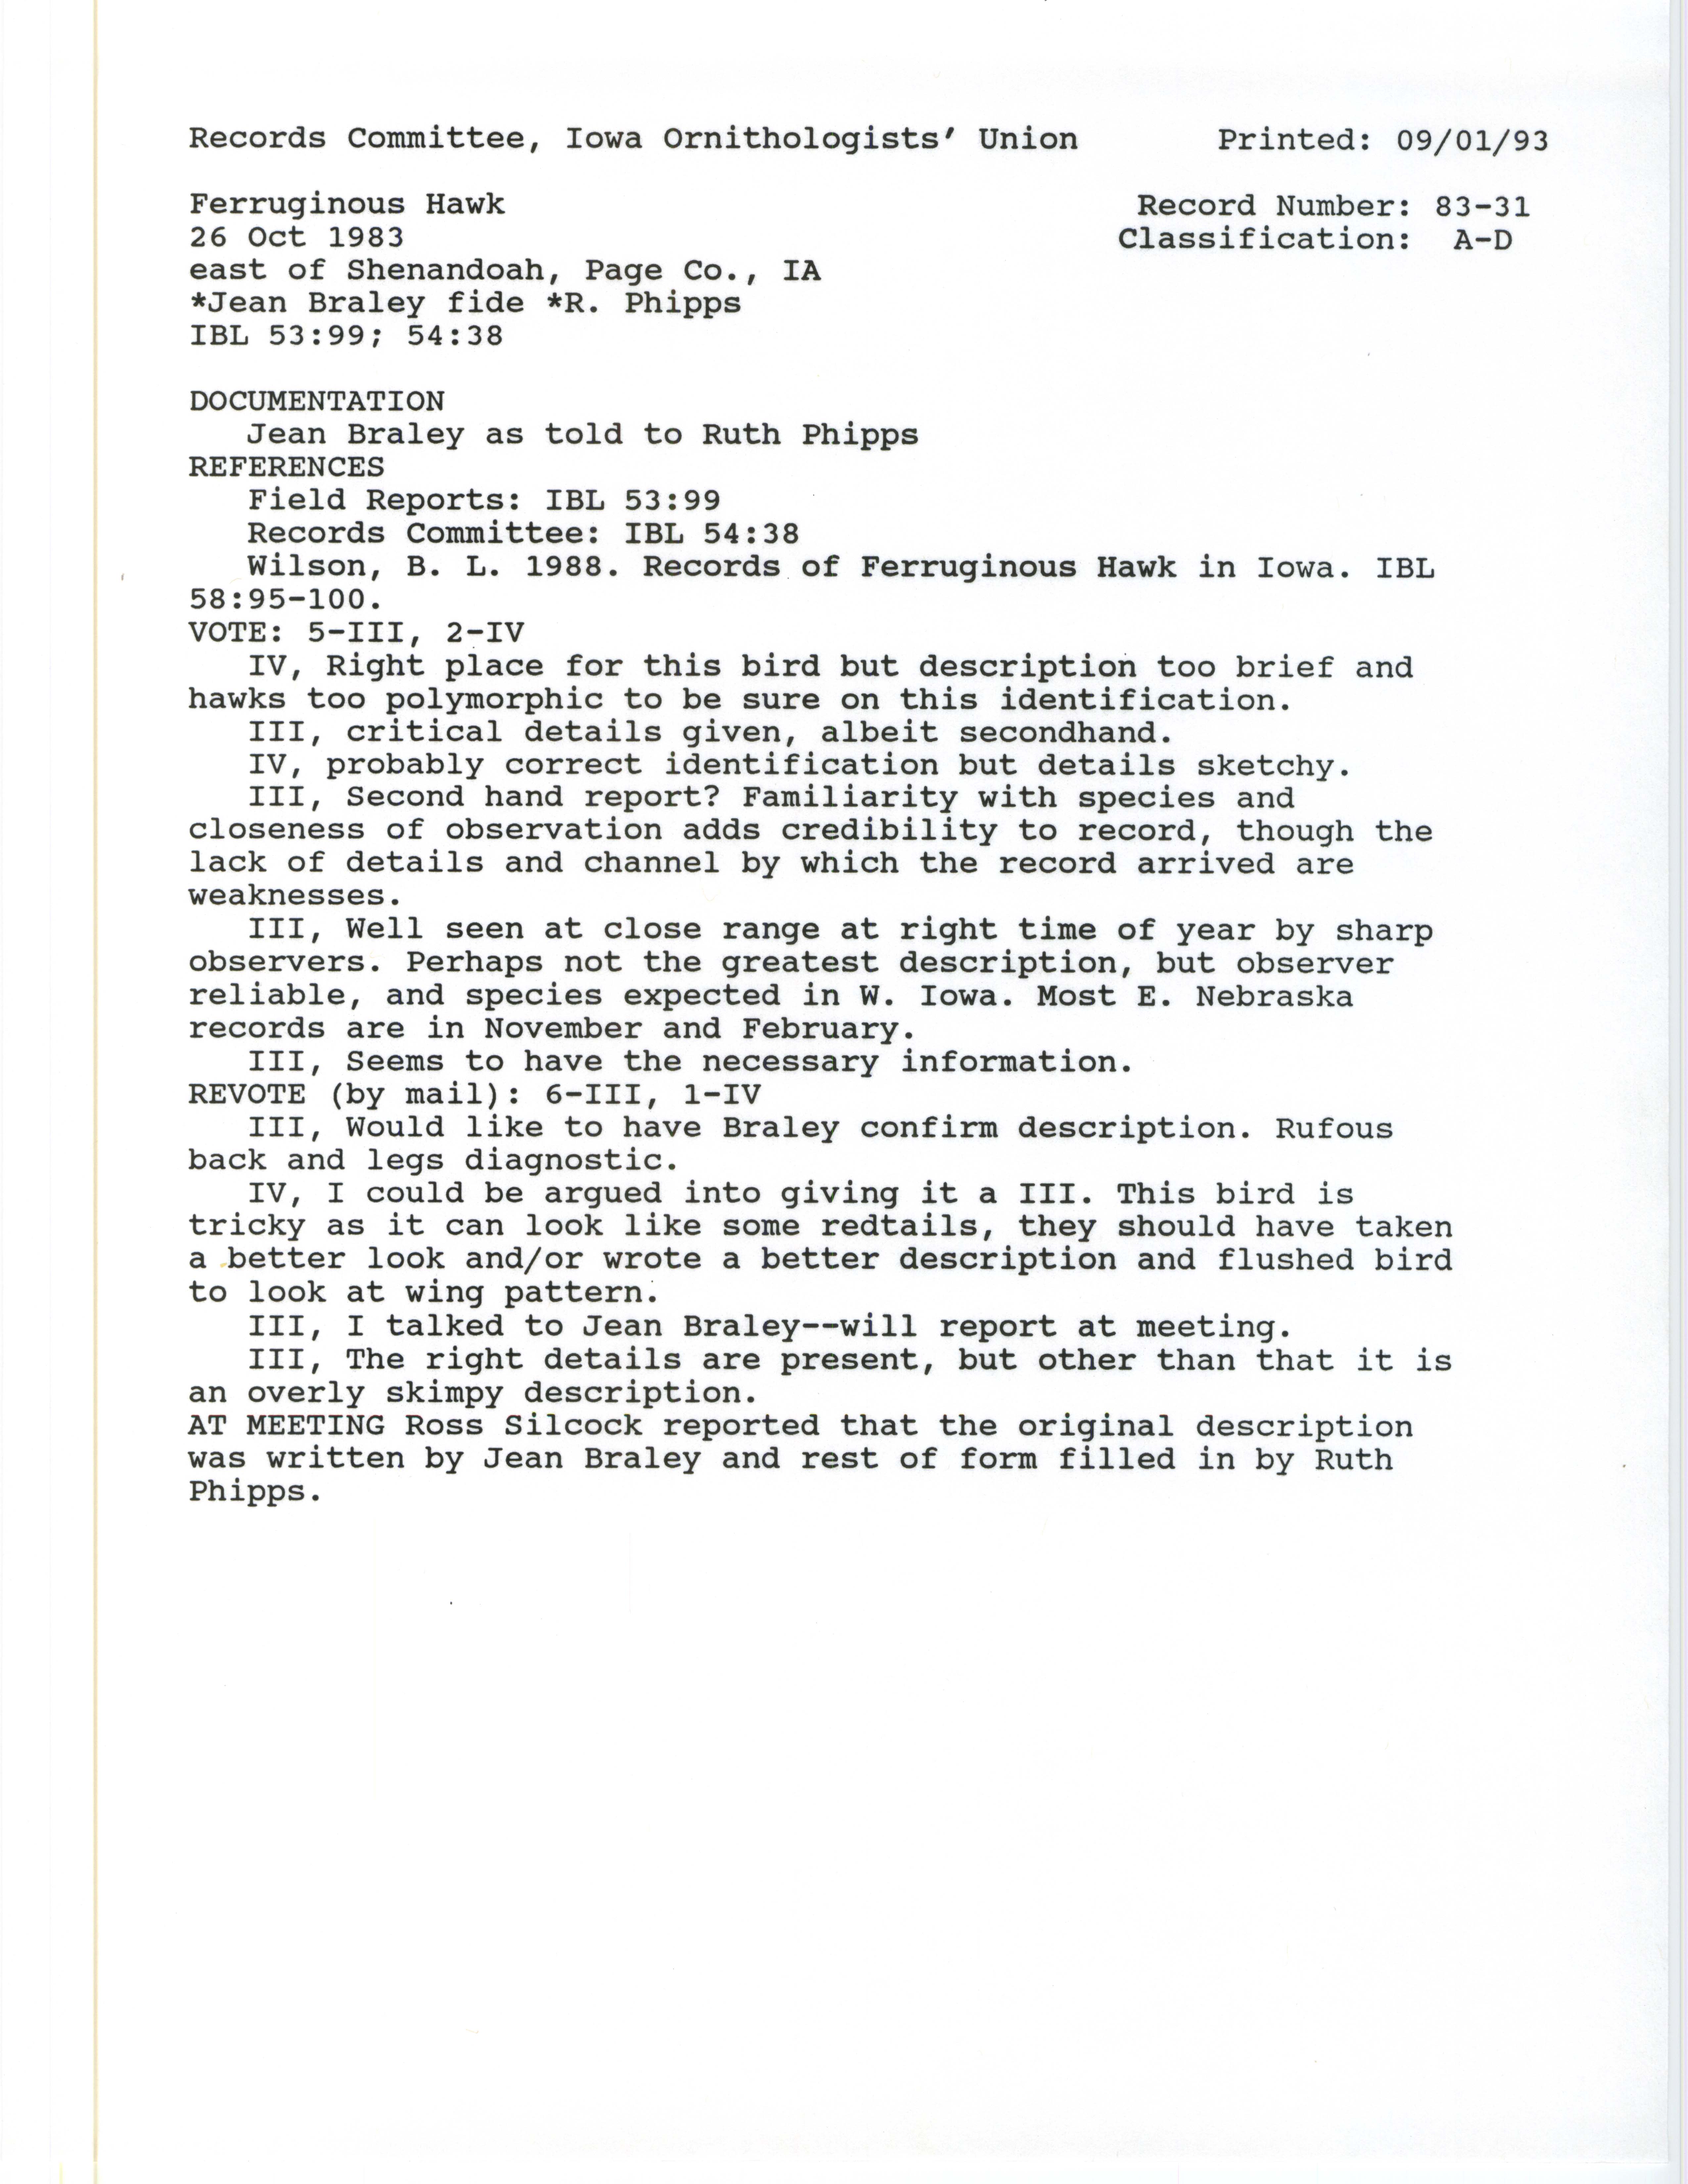 Records Committee review for rare bird sighting of Ferruginous Hawk east of Shenandoah, 1983